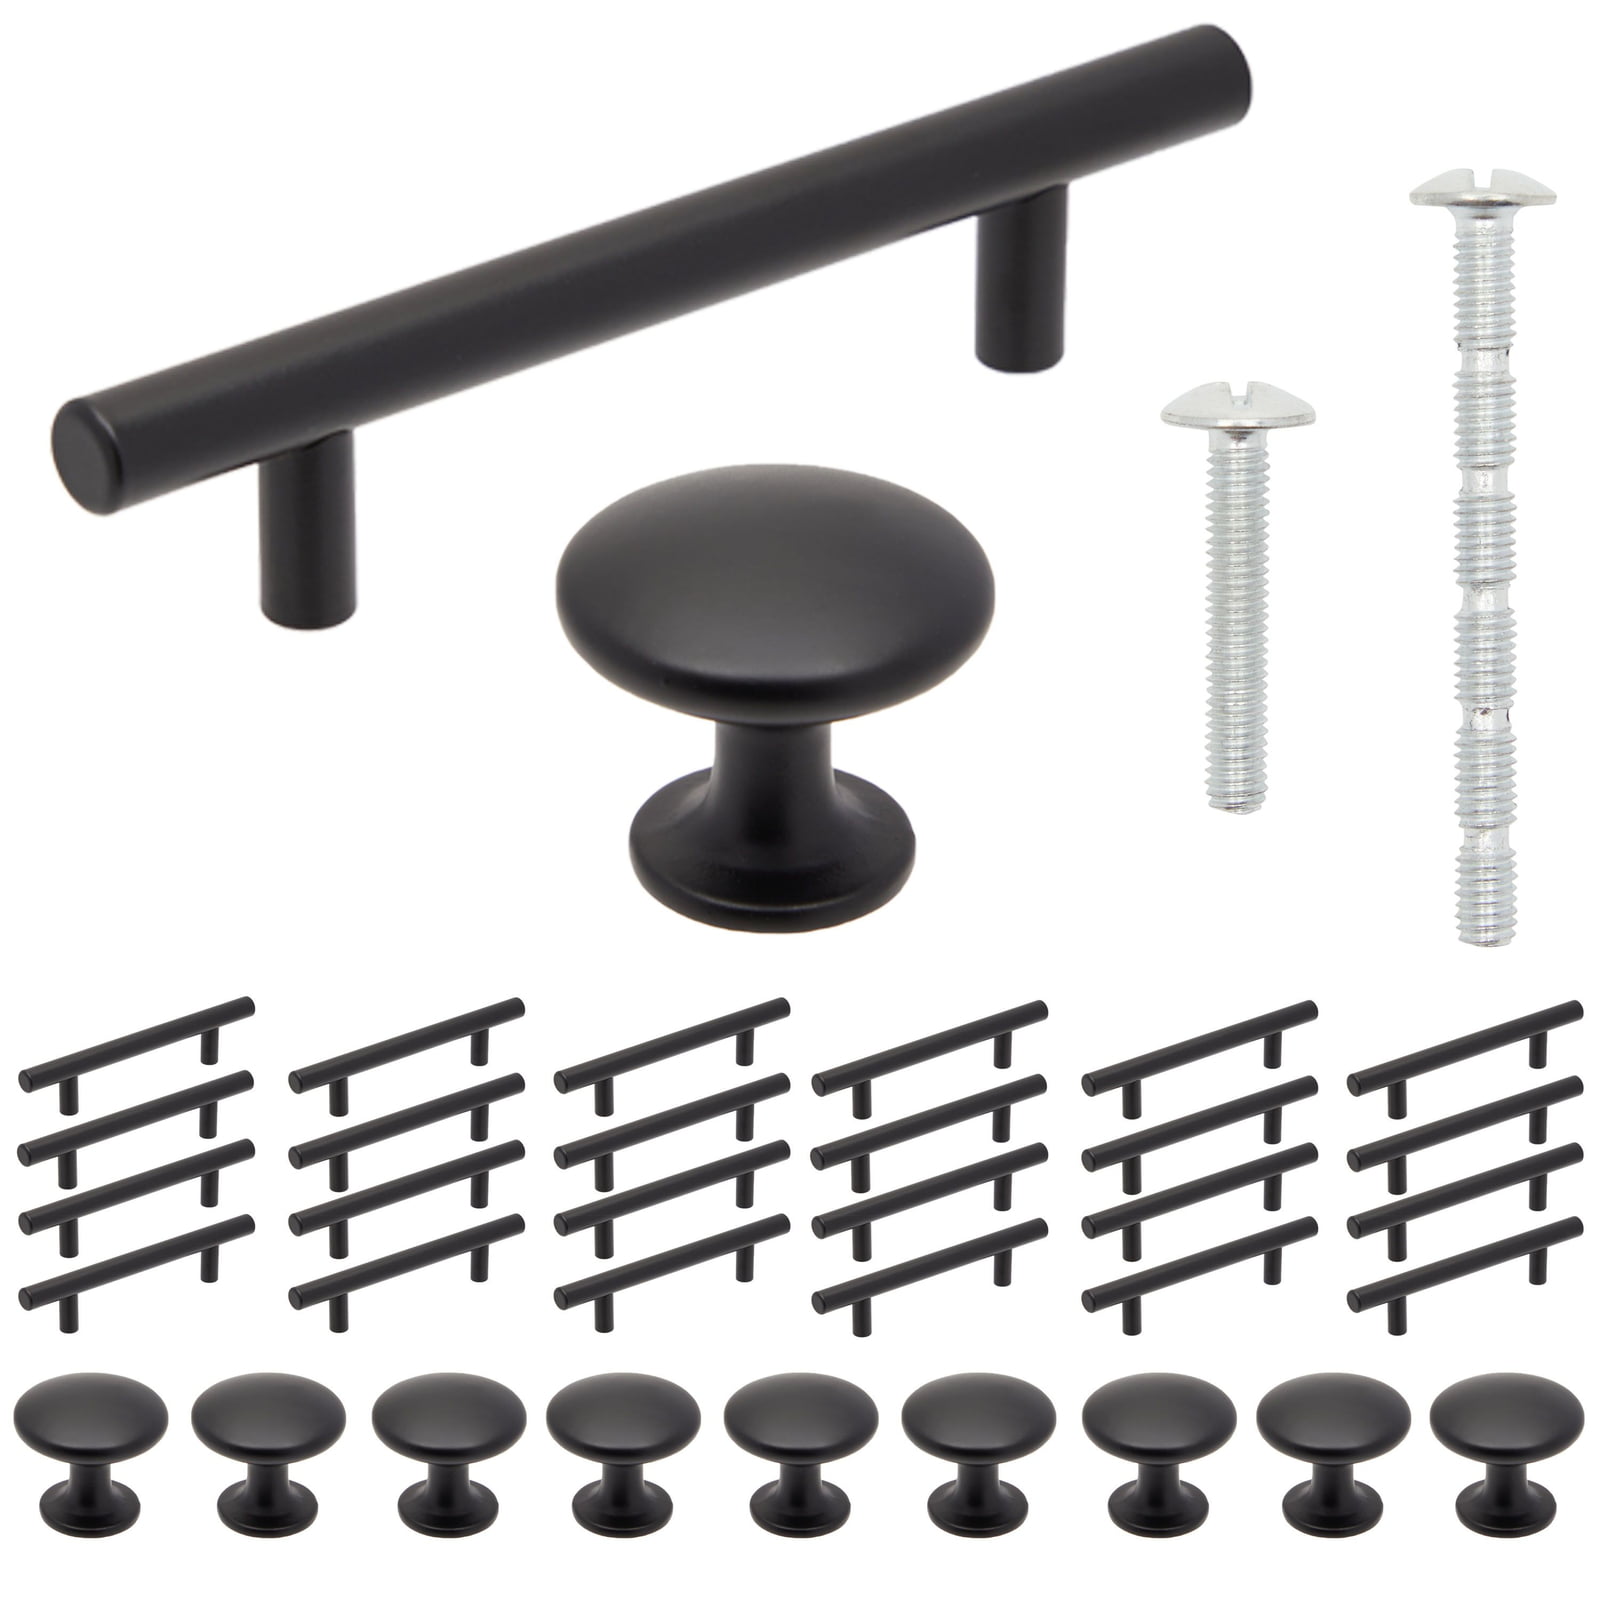 20 Pieces Pull Handles Antique Furniture Kitchen Cupboard Cabinet Drawer Shell Pull Handles Knobs Black